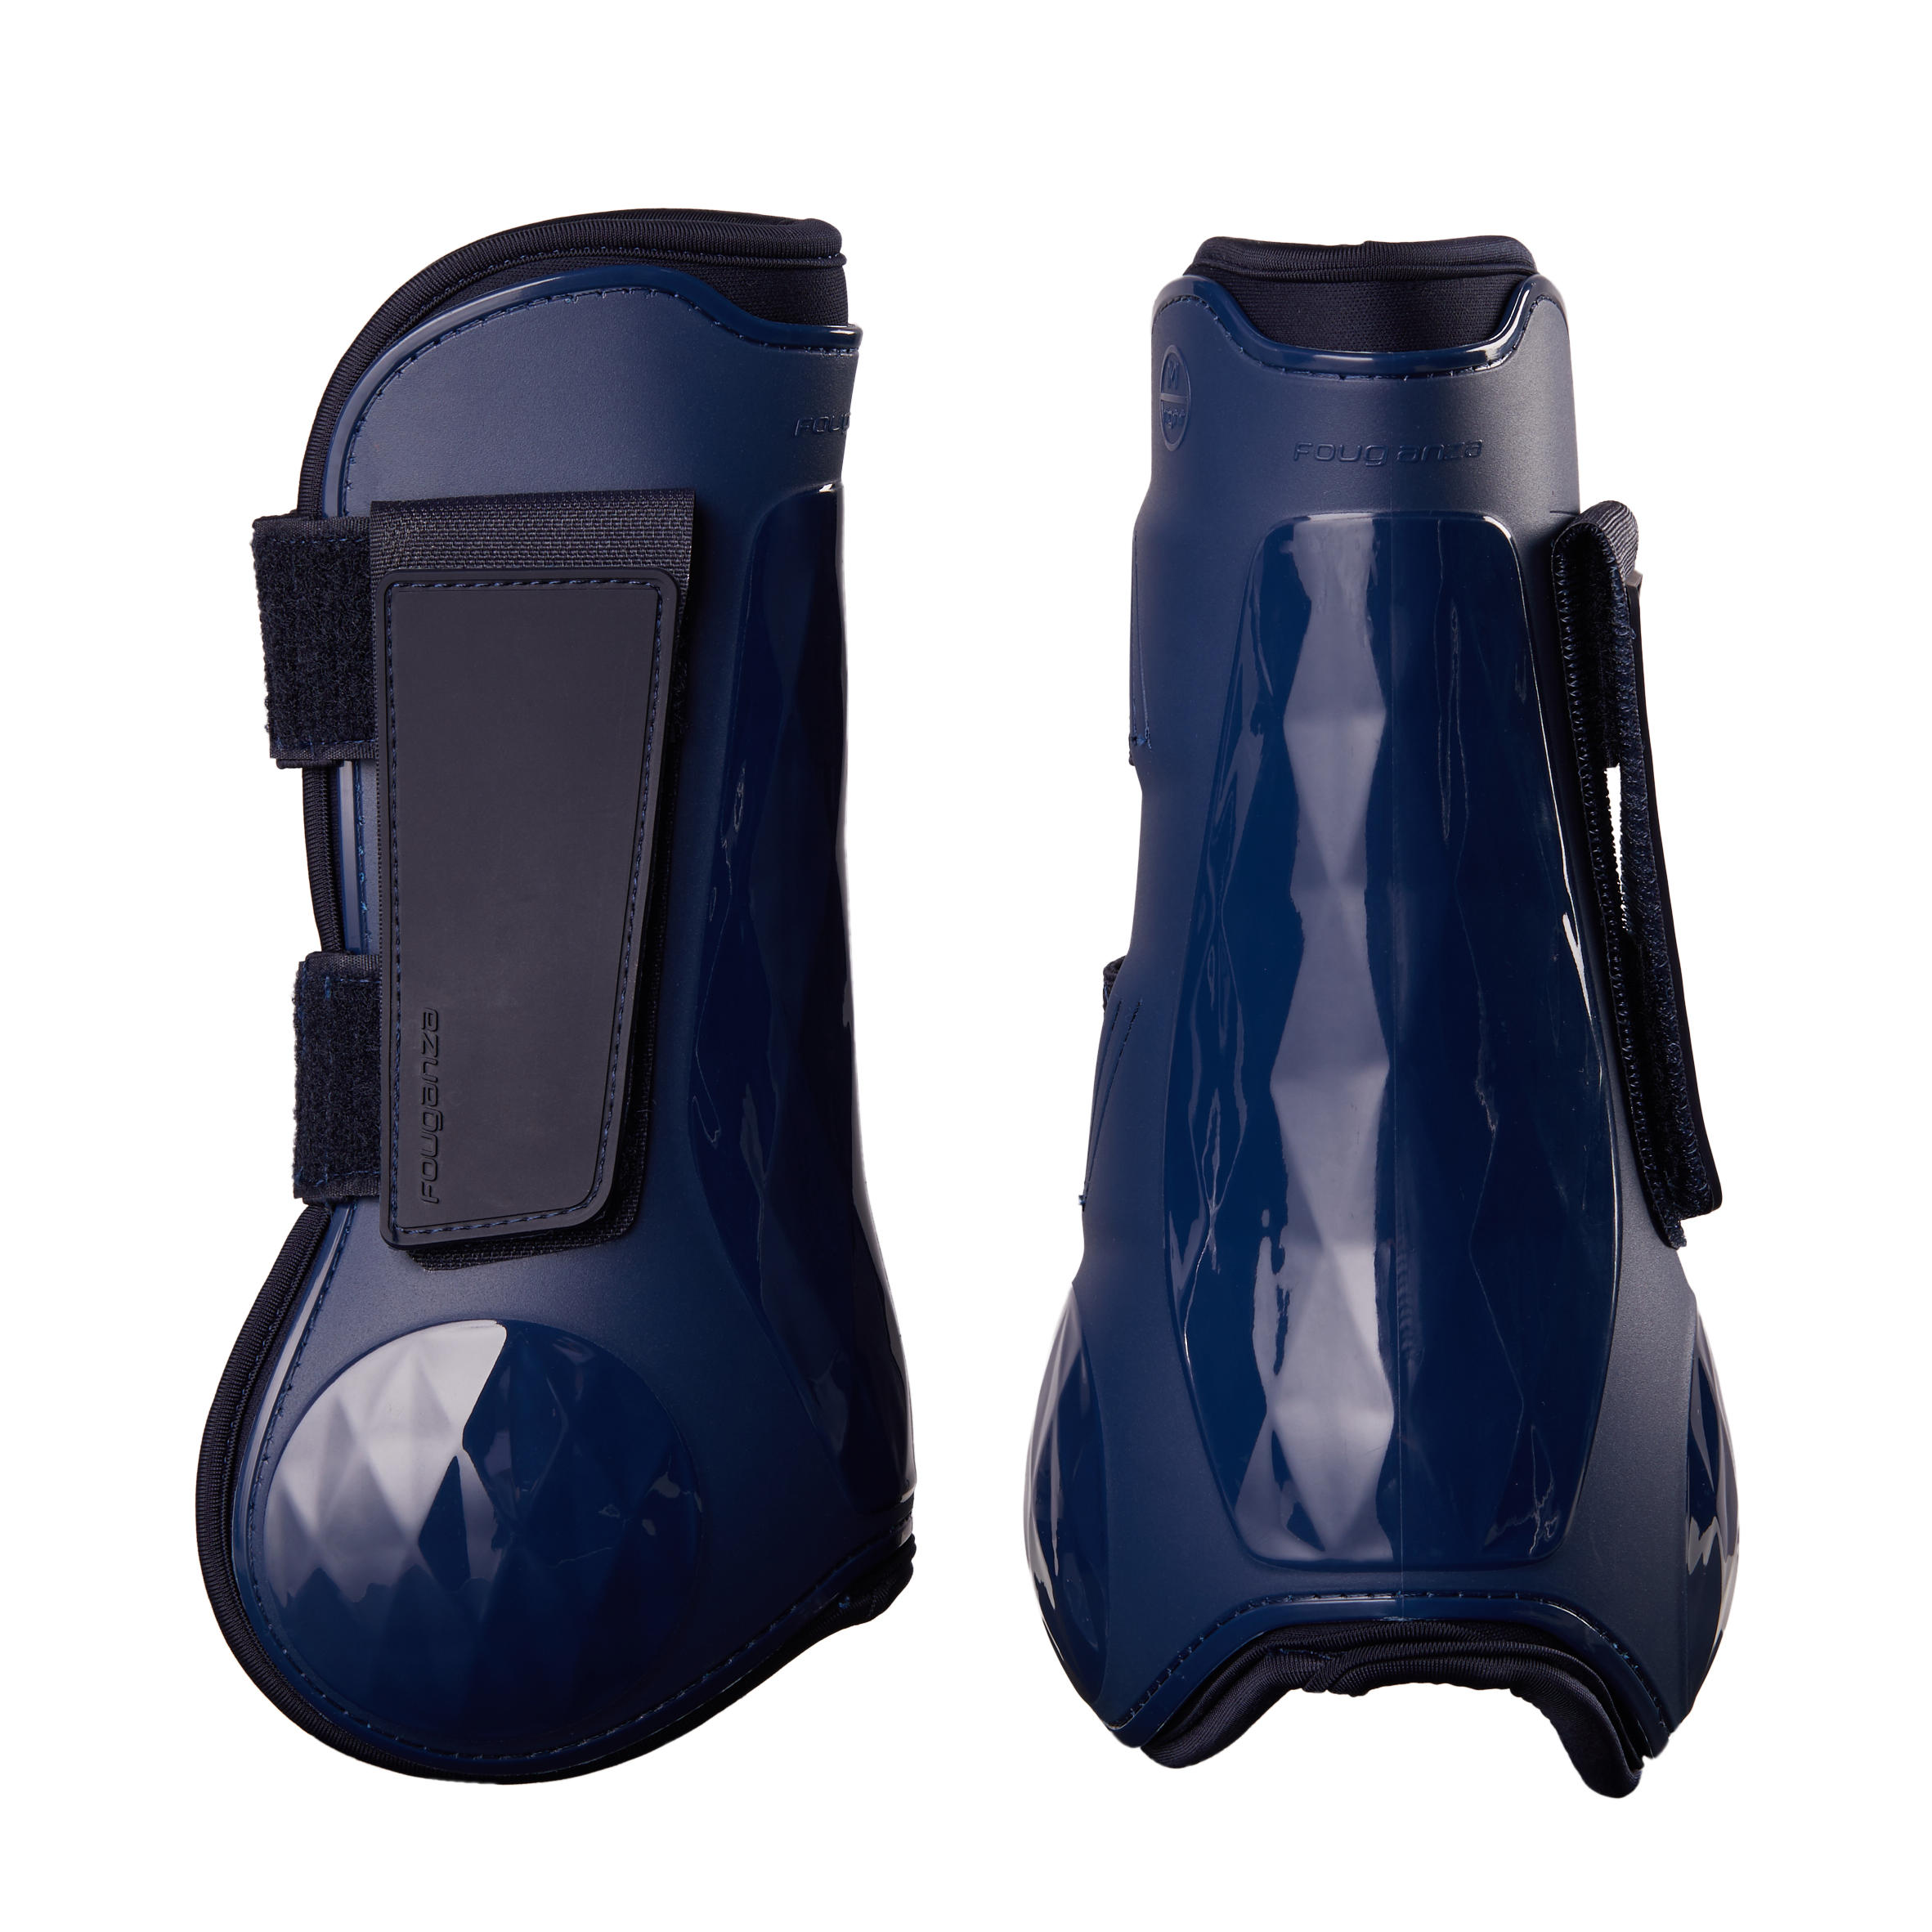 tendon boots for horses